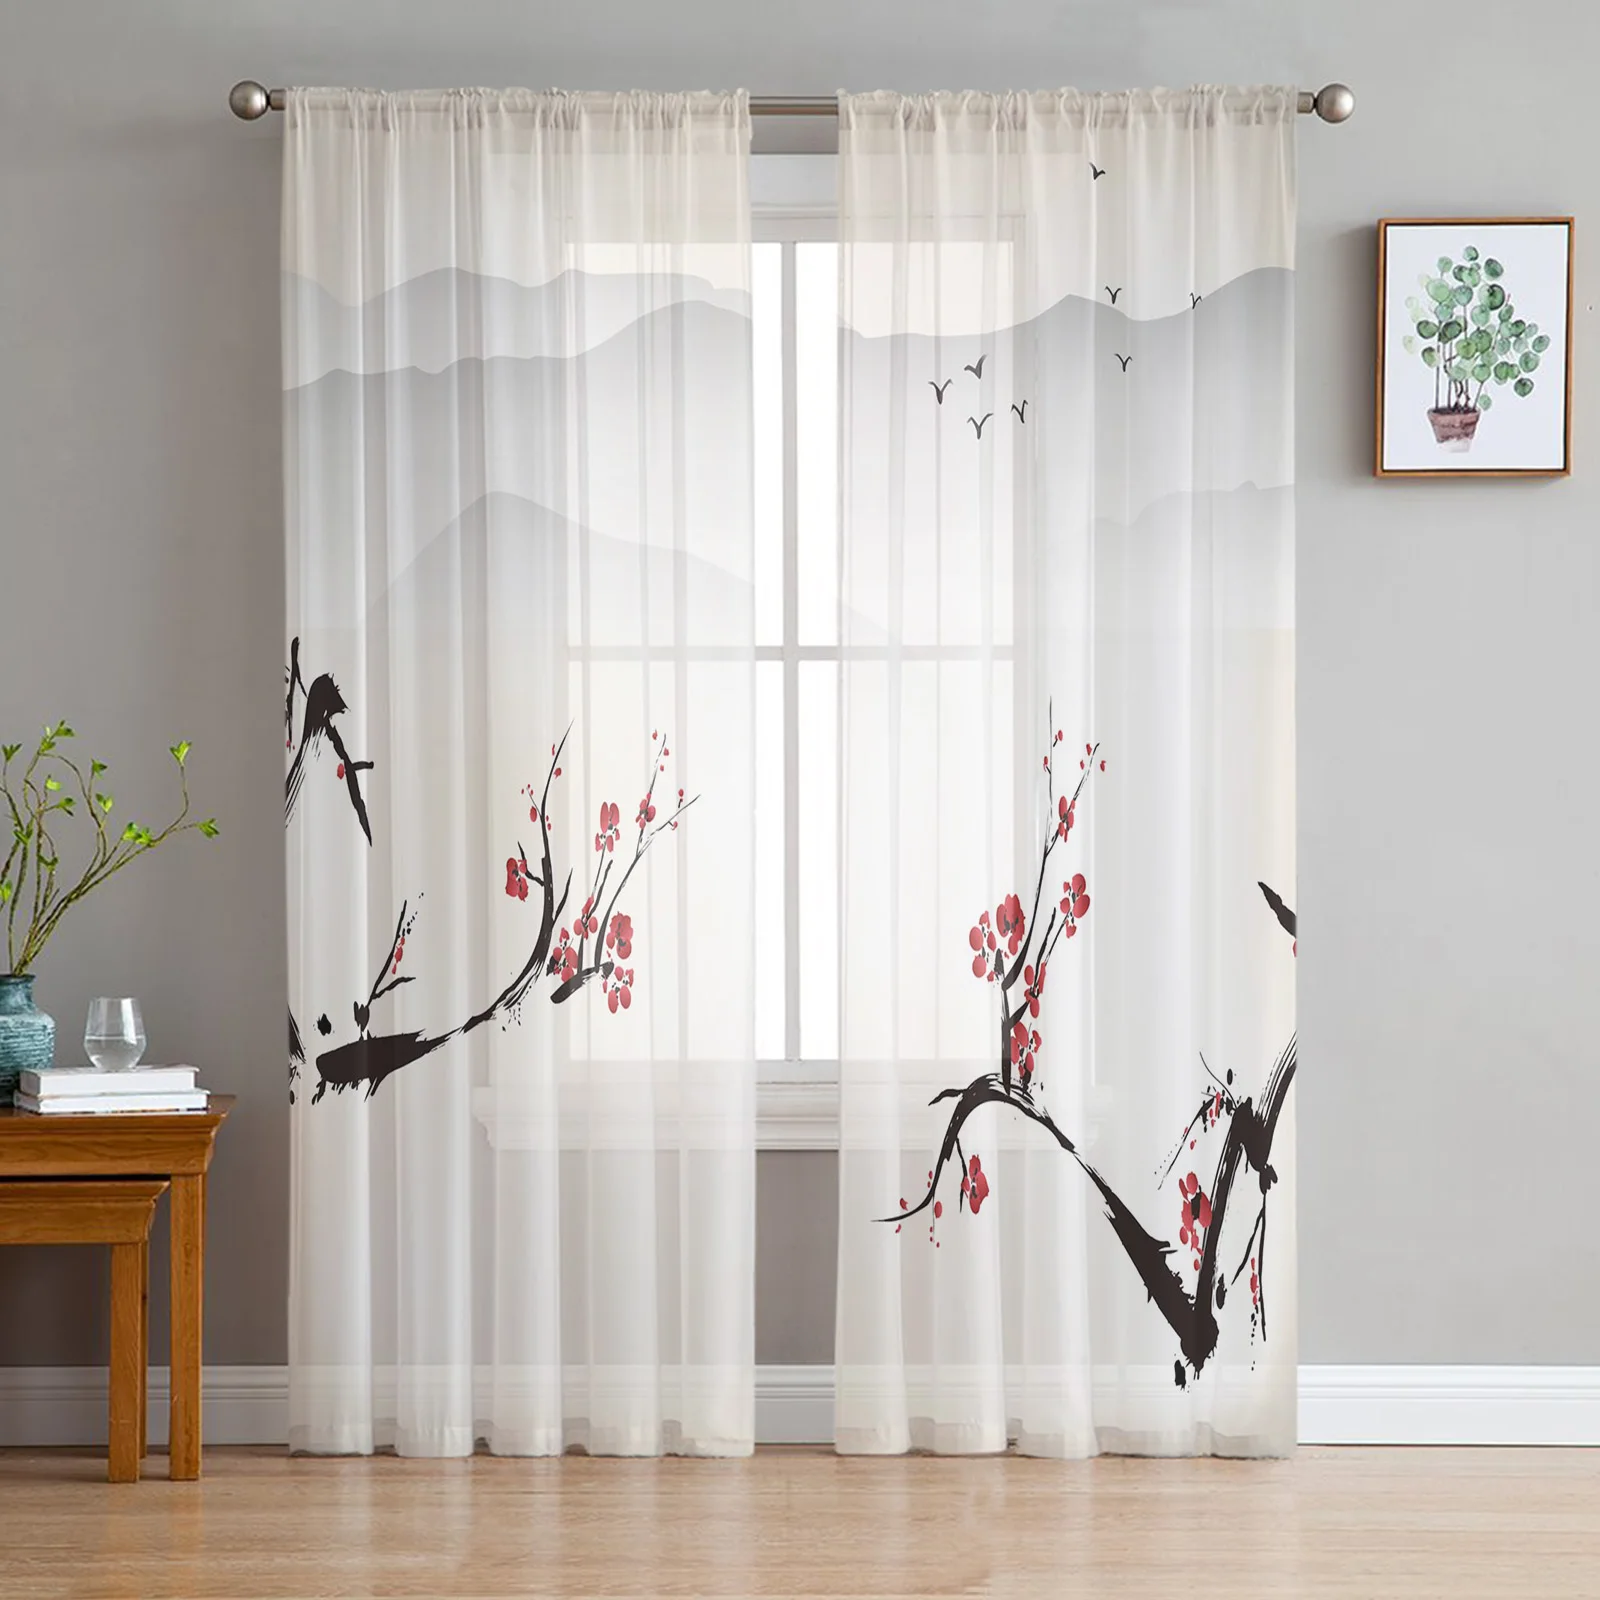 

Chinese Style Flower Plum Blossom Scenery Chiffon Sheer Curtains for Living Room Bedroom Decor Window Voile Tulle Curtain Drapes